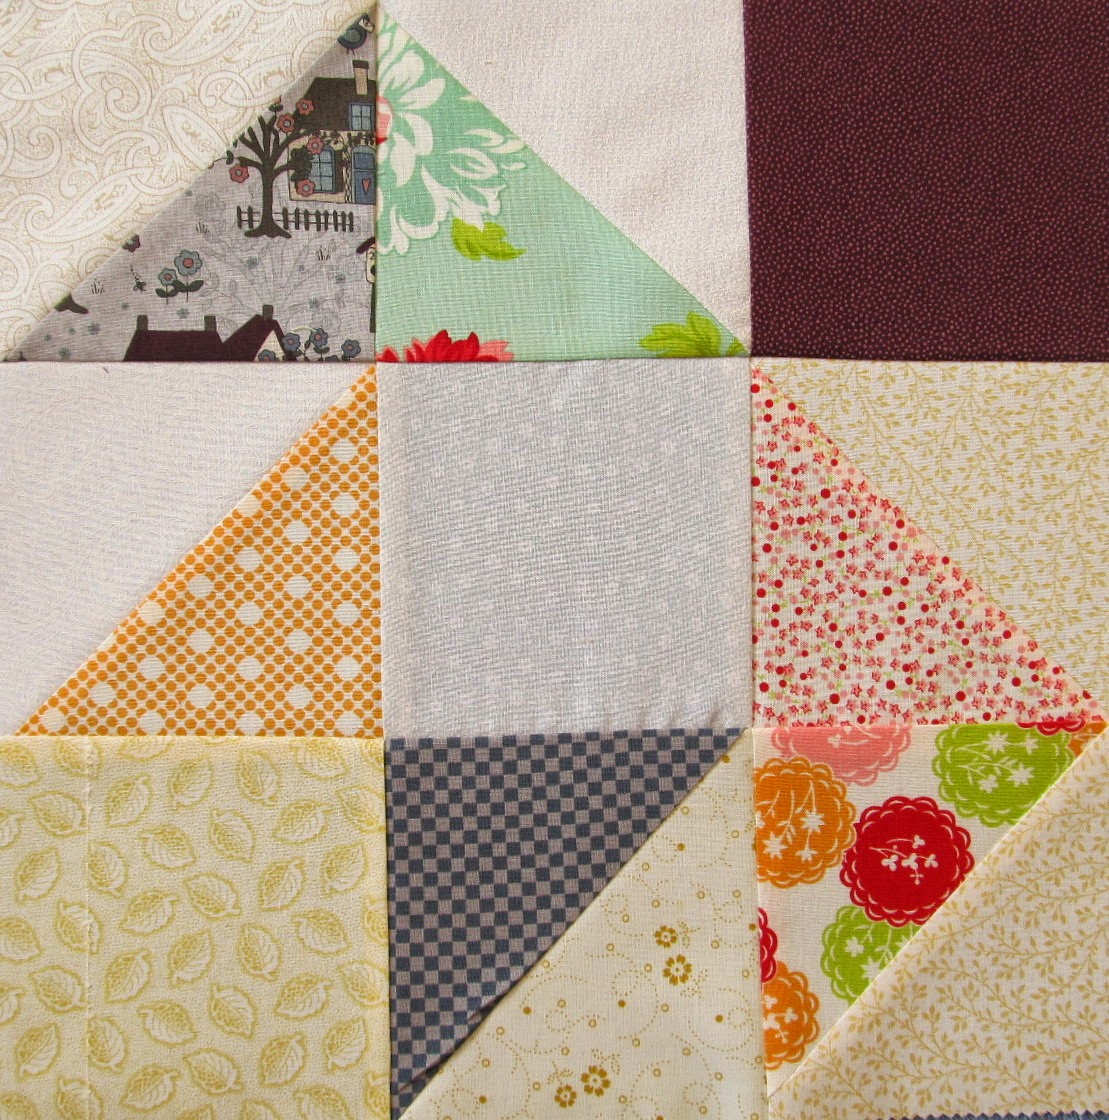 How to piece a quilt block